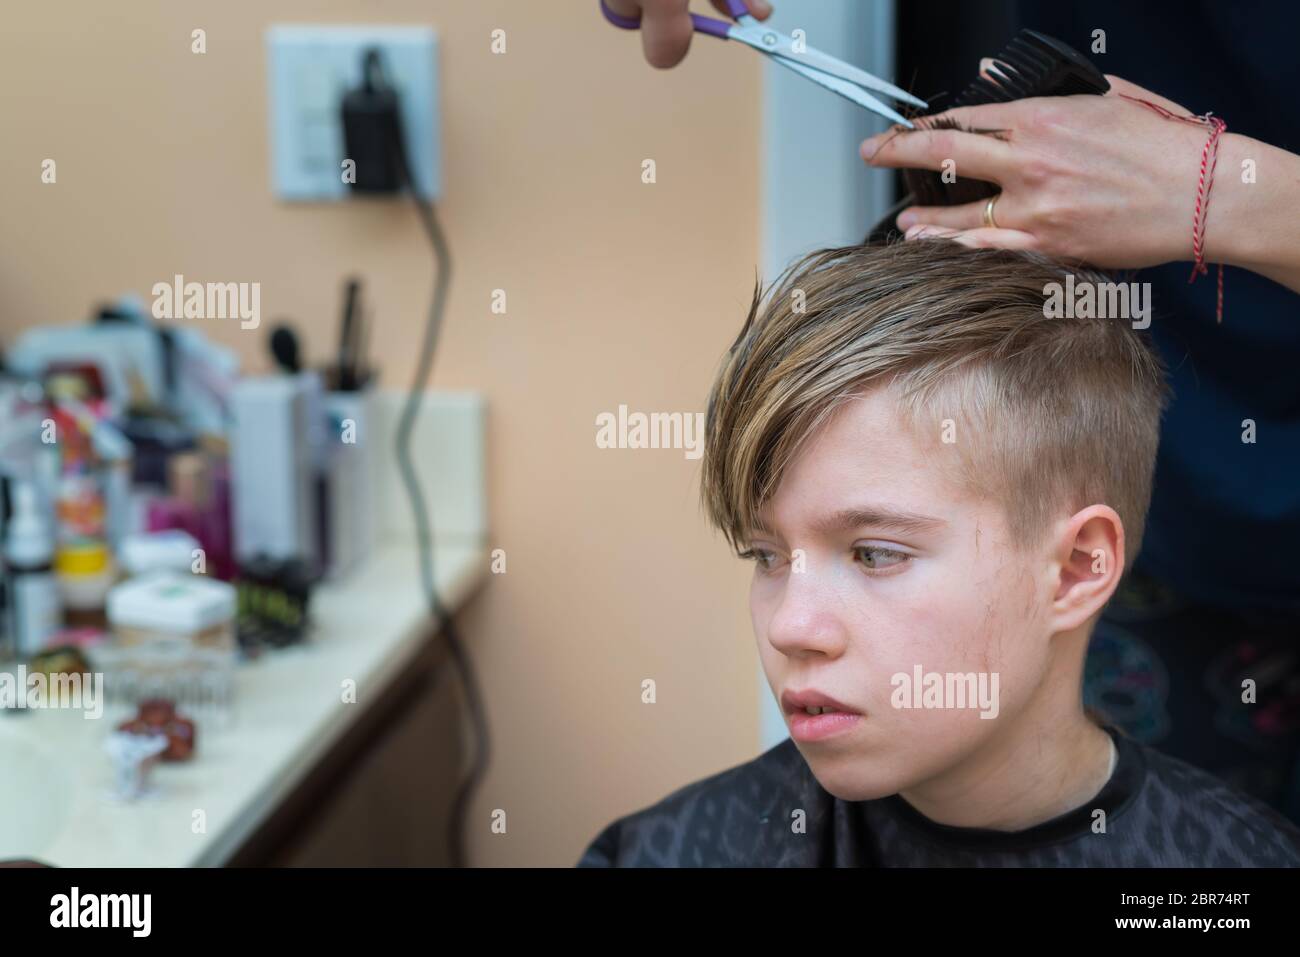 Mom cuts the hair of her son at home during quarantine amid COVID-19  coronavirus pandemic Stock Photo